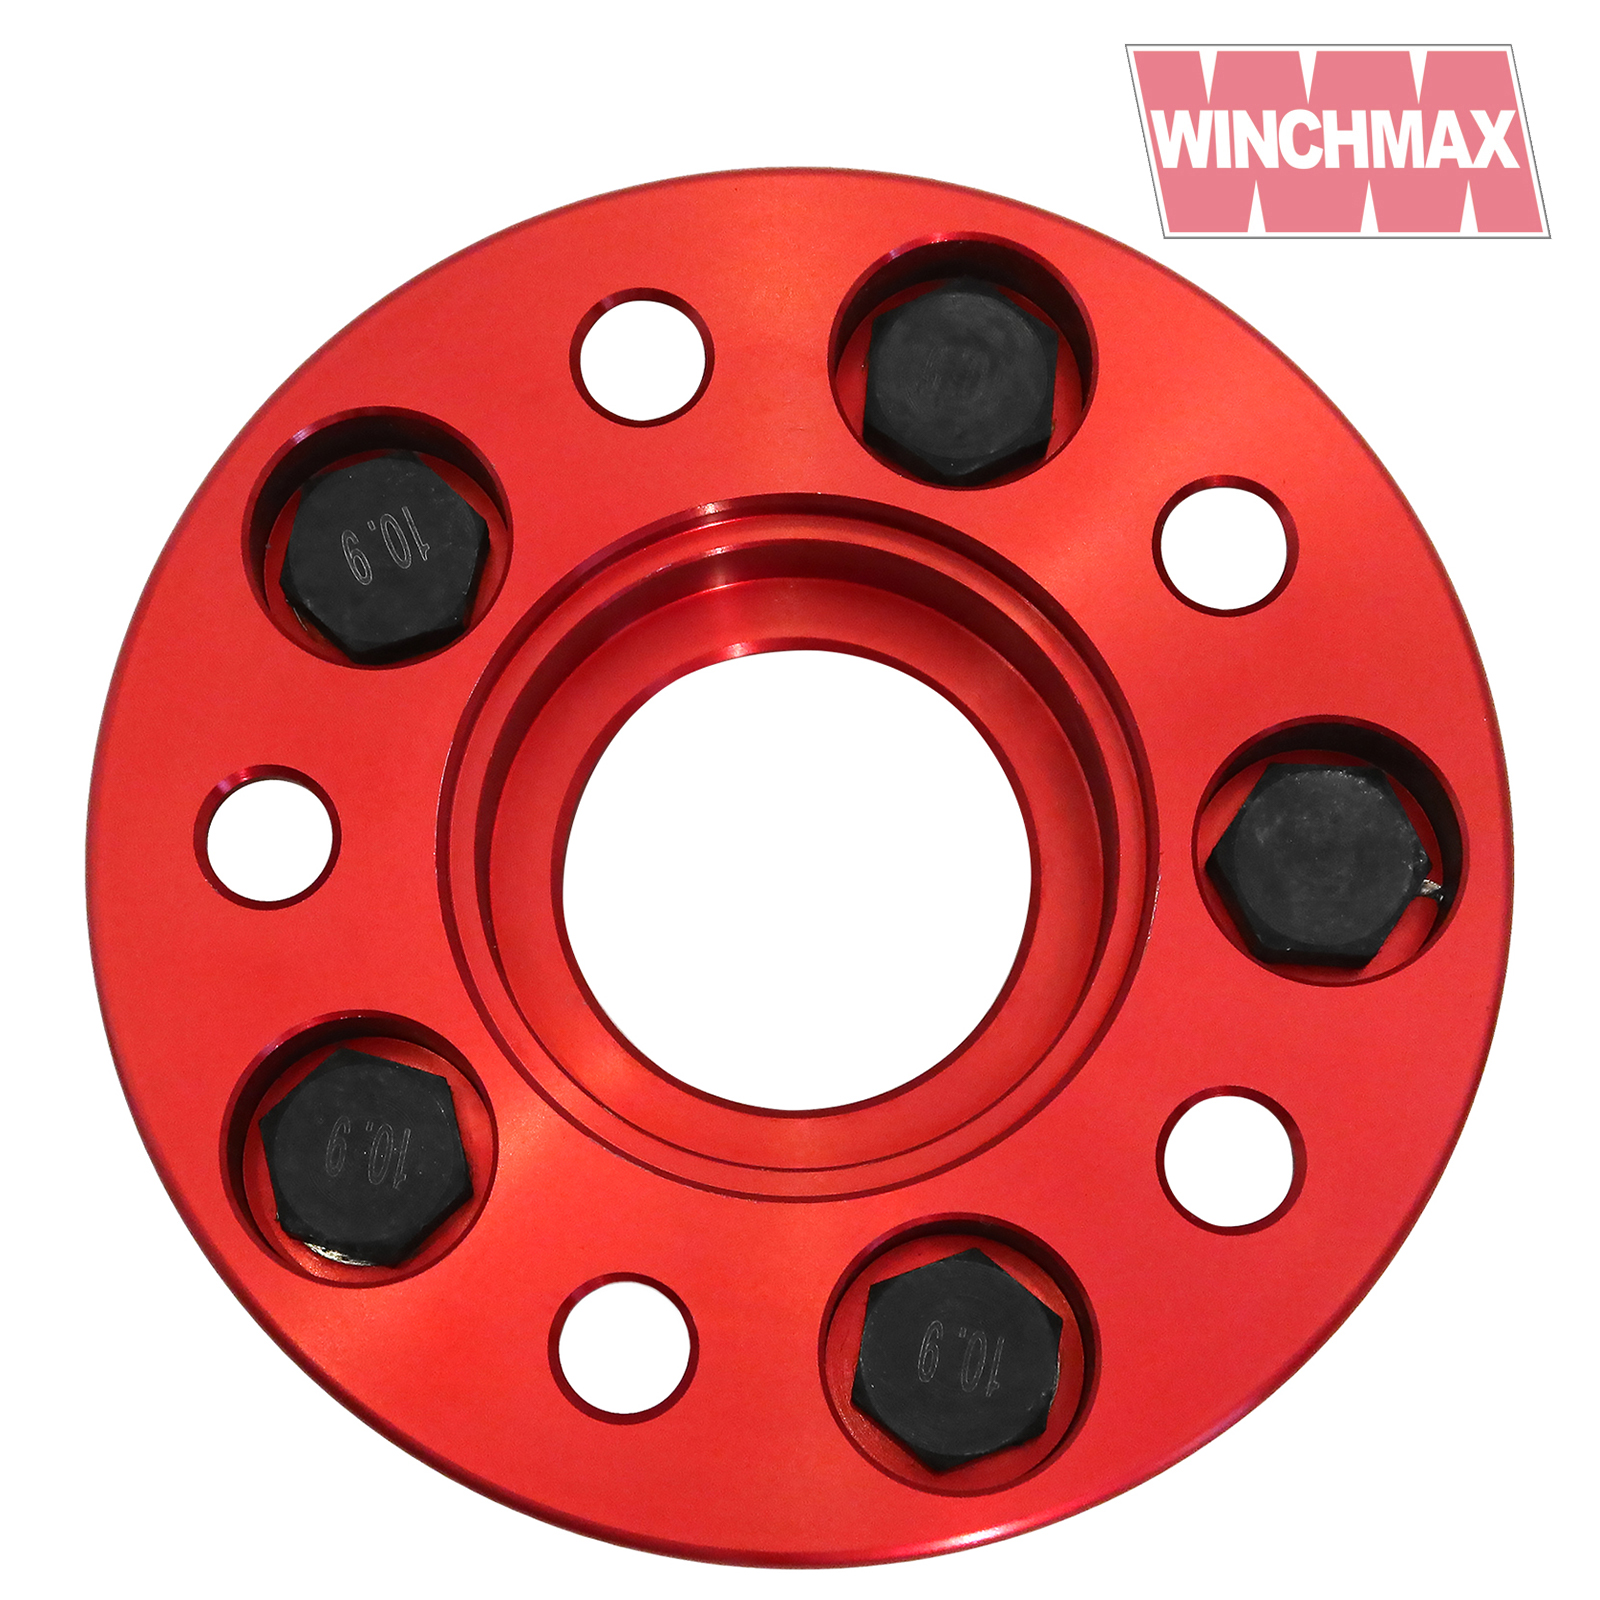 WINCHMAX 30mm Wheel Spacer T3